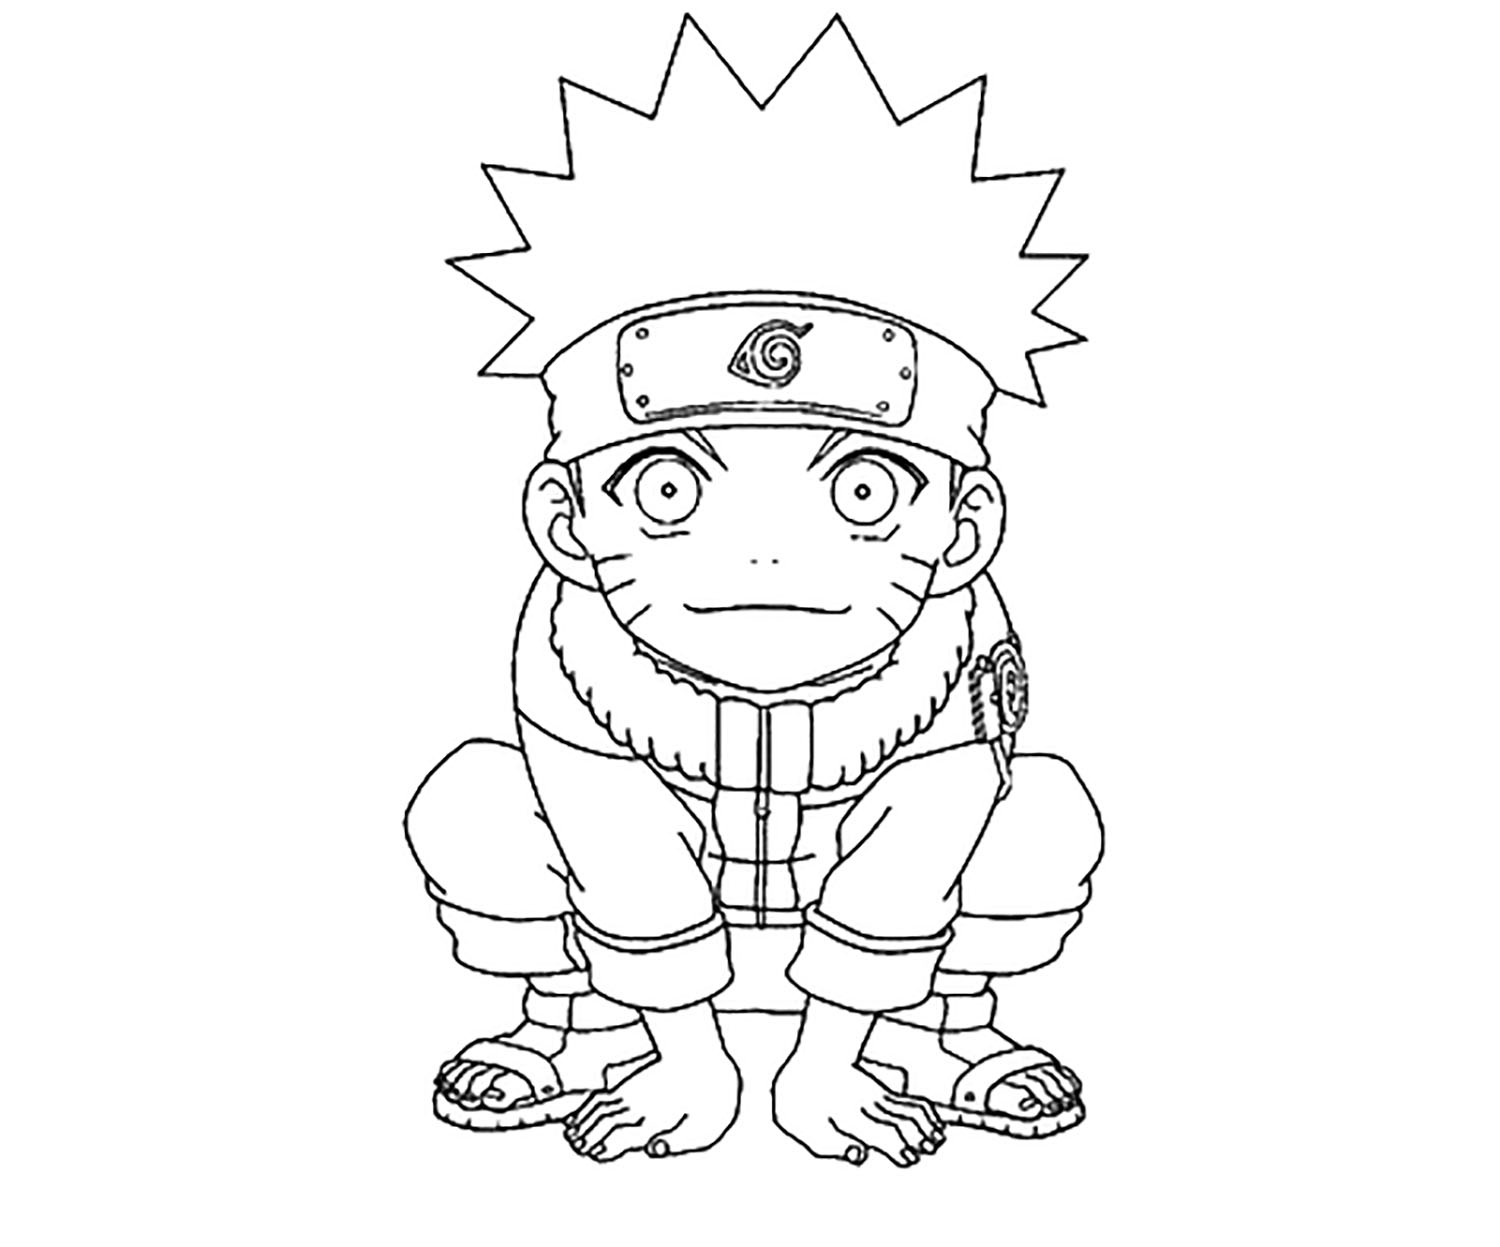 106  Naruto Coloring Pages Colored  HD